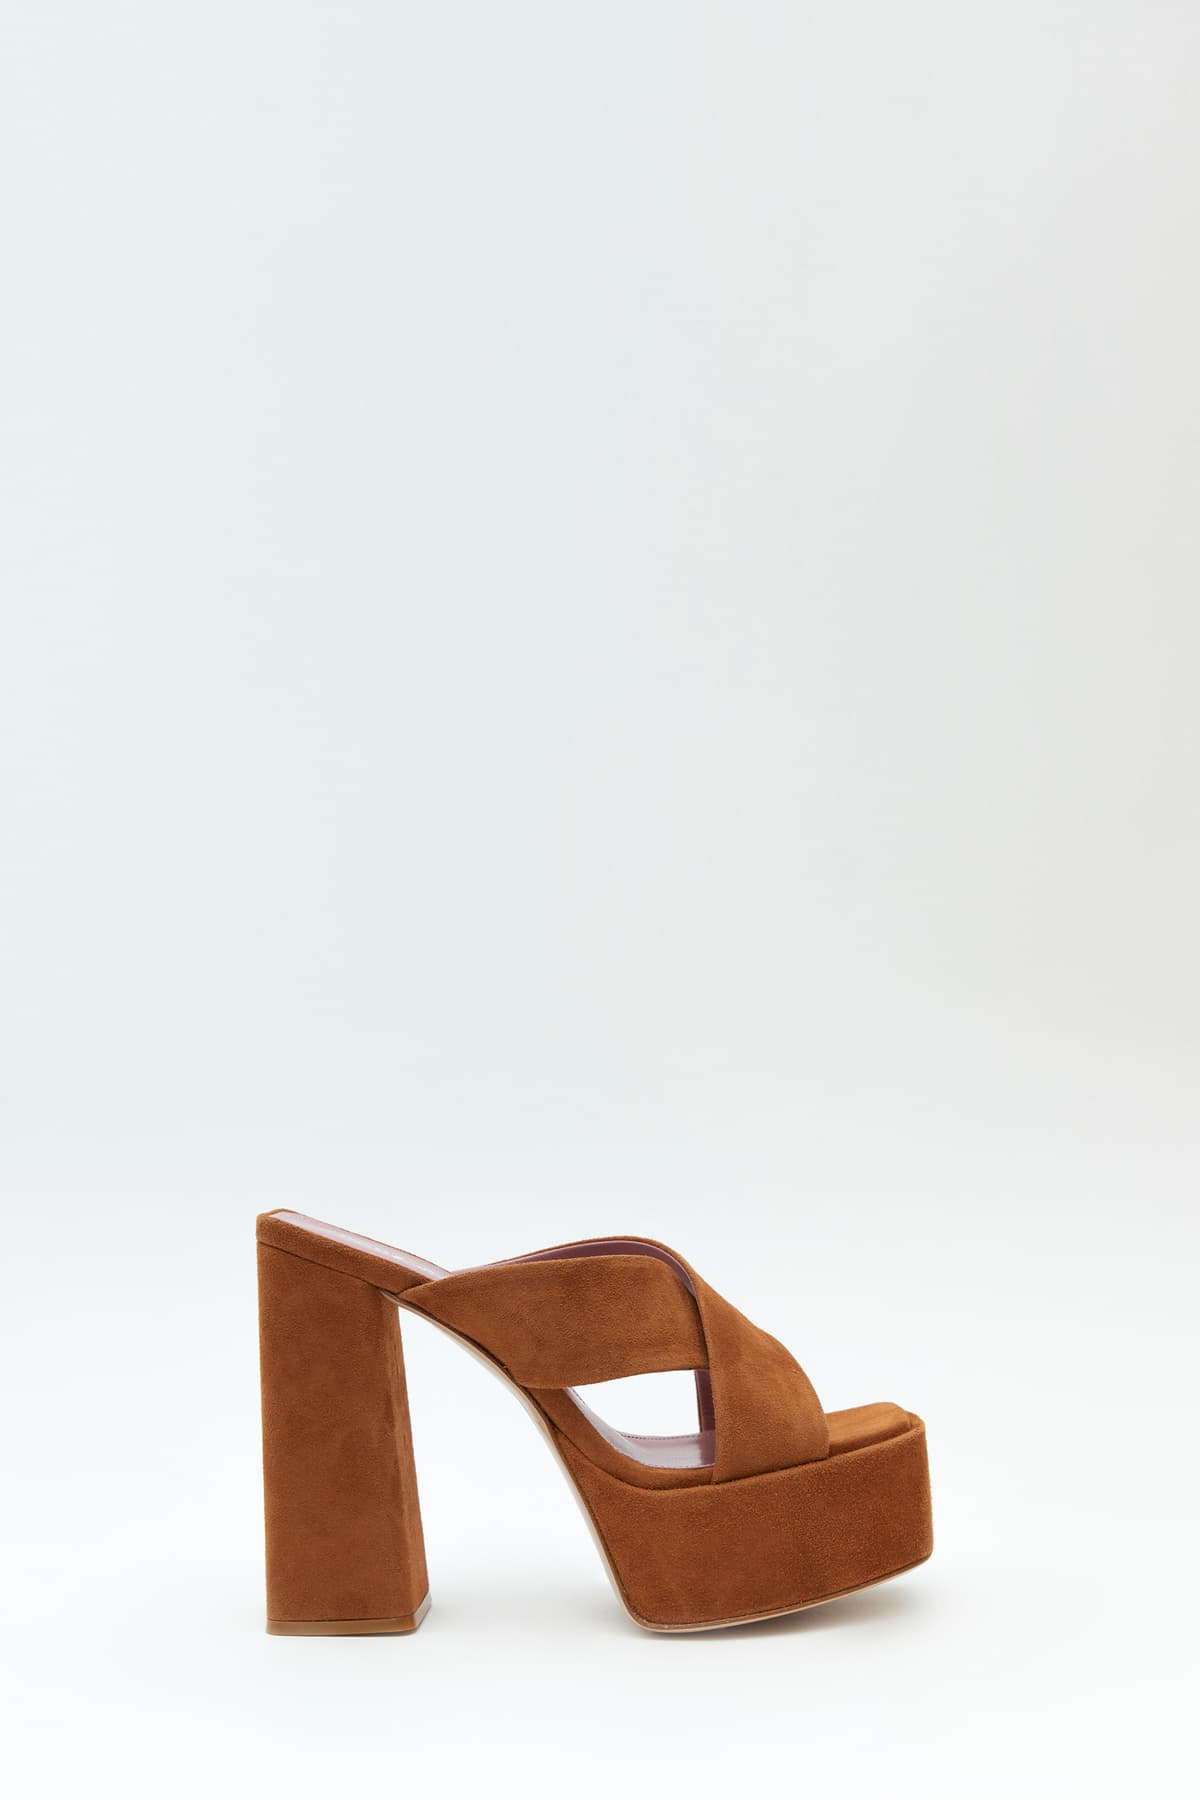 Sideview of The Wannabe mule in cognac from the Haus of Honey fall-winter 2023-24